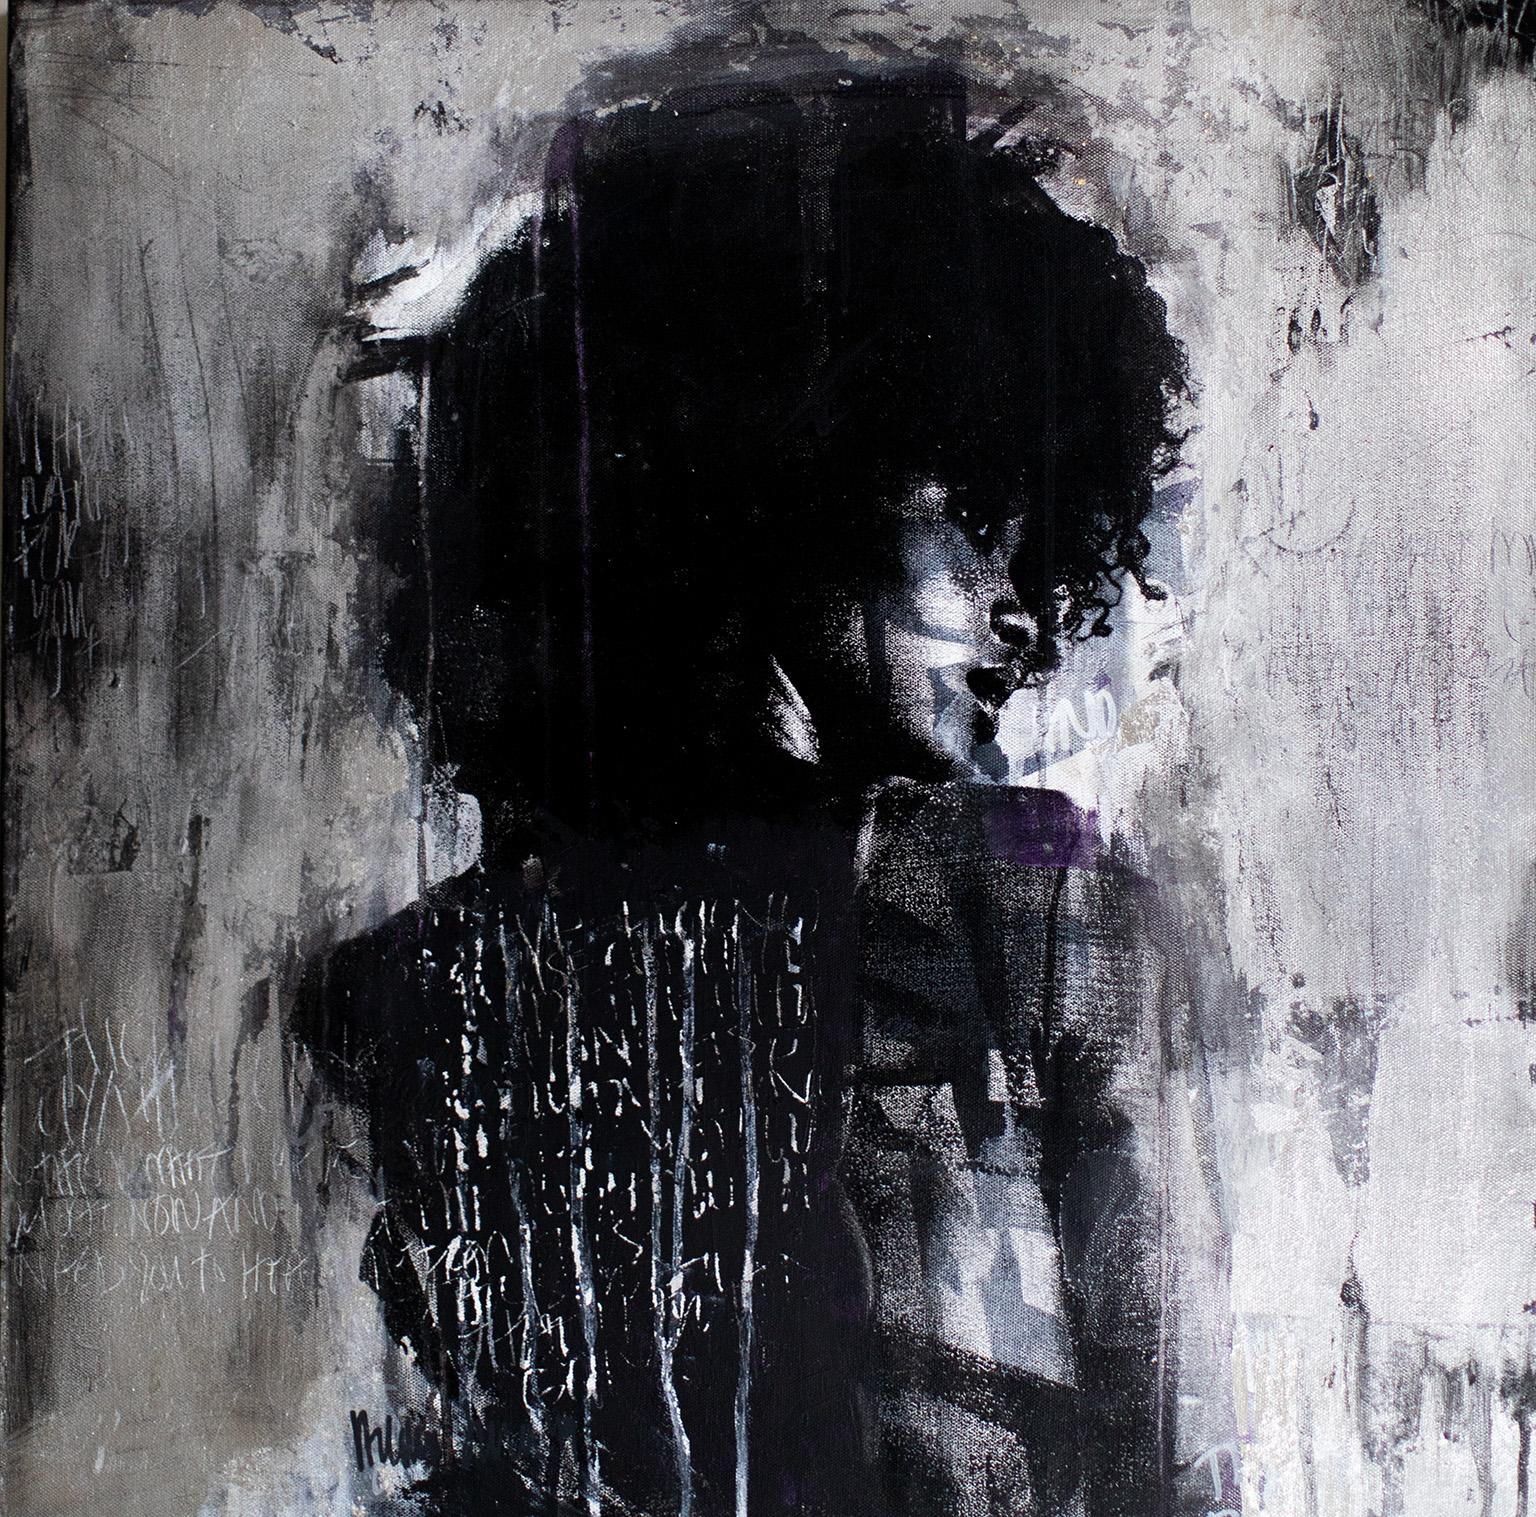  ABOUT THIS PIECE:
“Shadow Girl, (Cortney-A4)” is mixed media street art by Addison Jones featuring her own portrait photography. It’s produced using silver leaf on stretched canvas. This piece can be classified as Contemporary Art, Mixed Media Art,